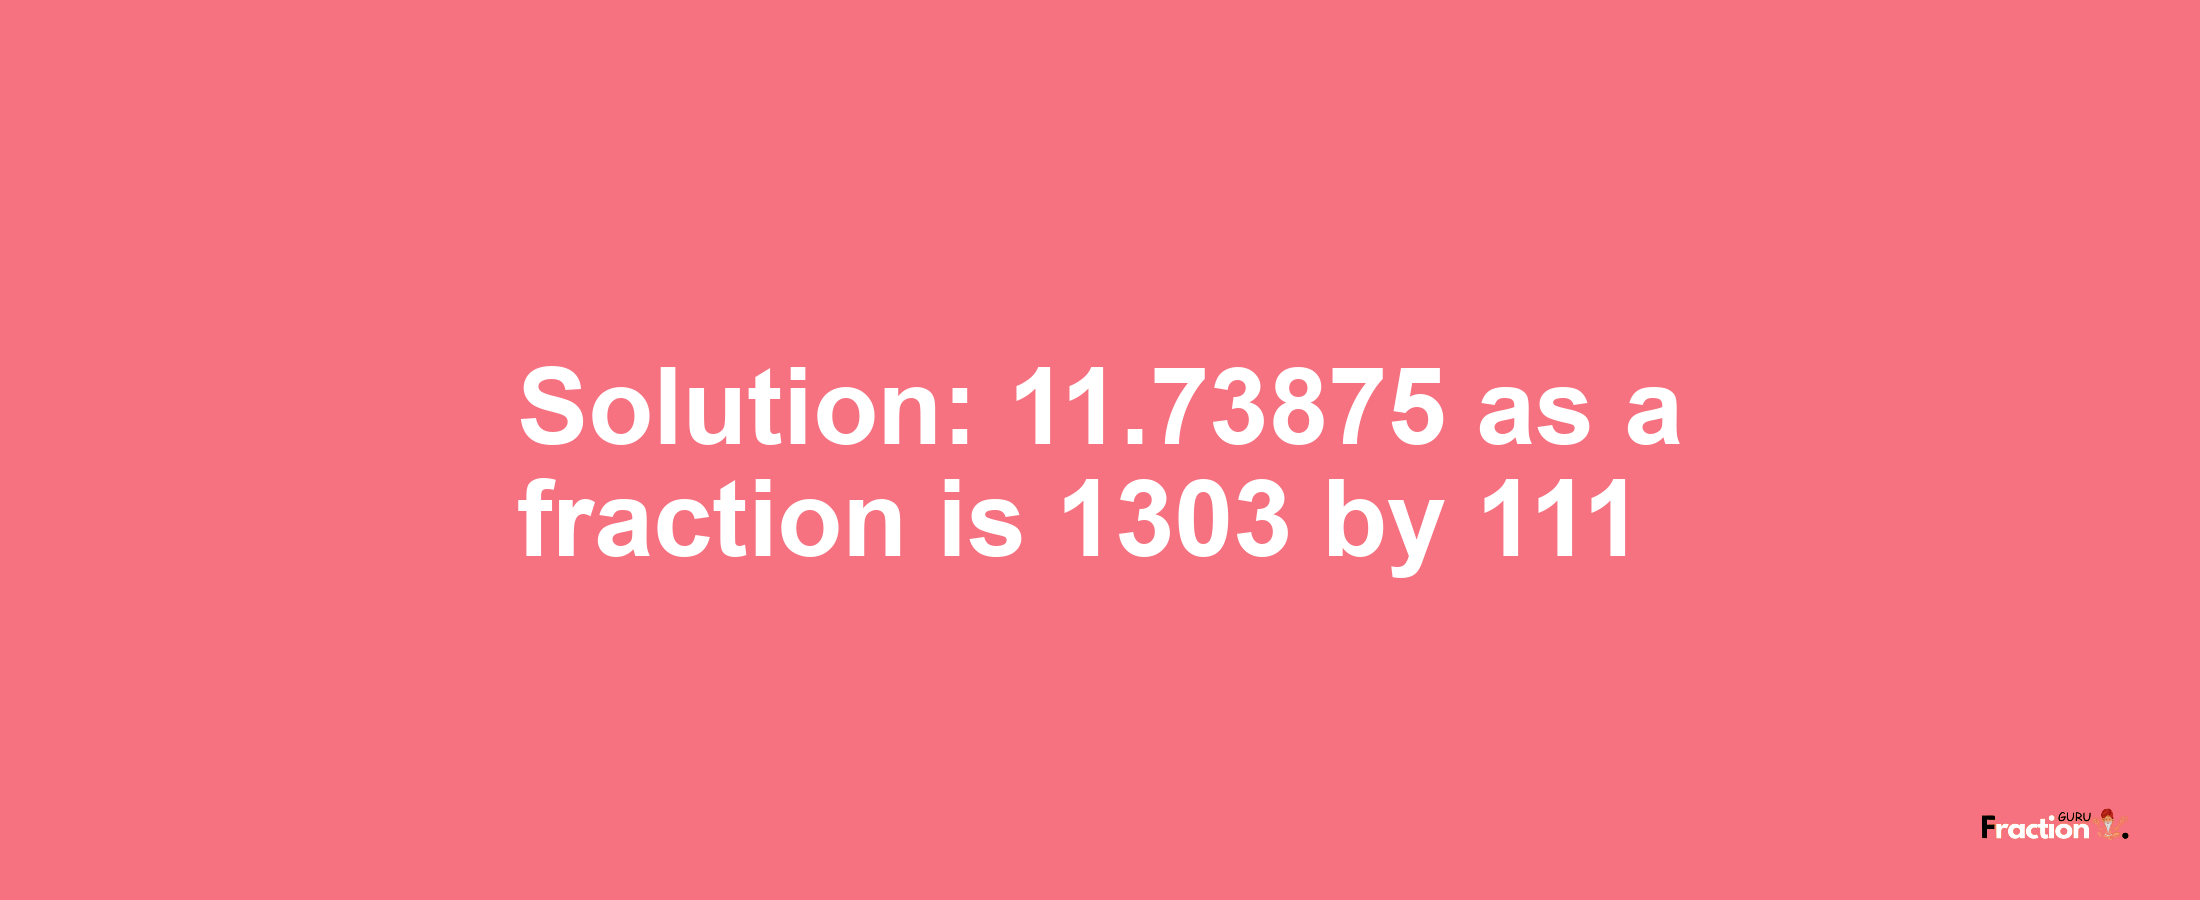 Solution:11.73875 as a fraction is 1303/111